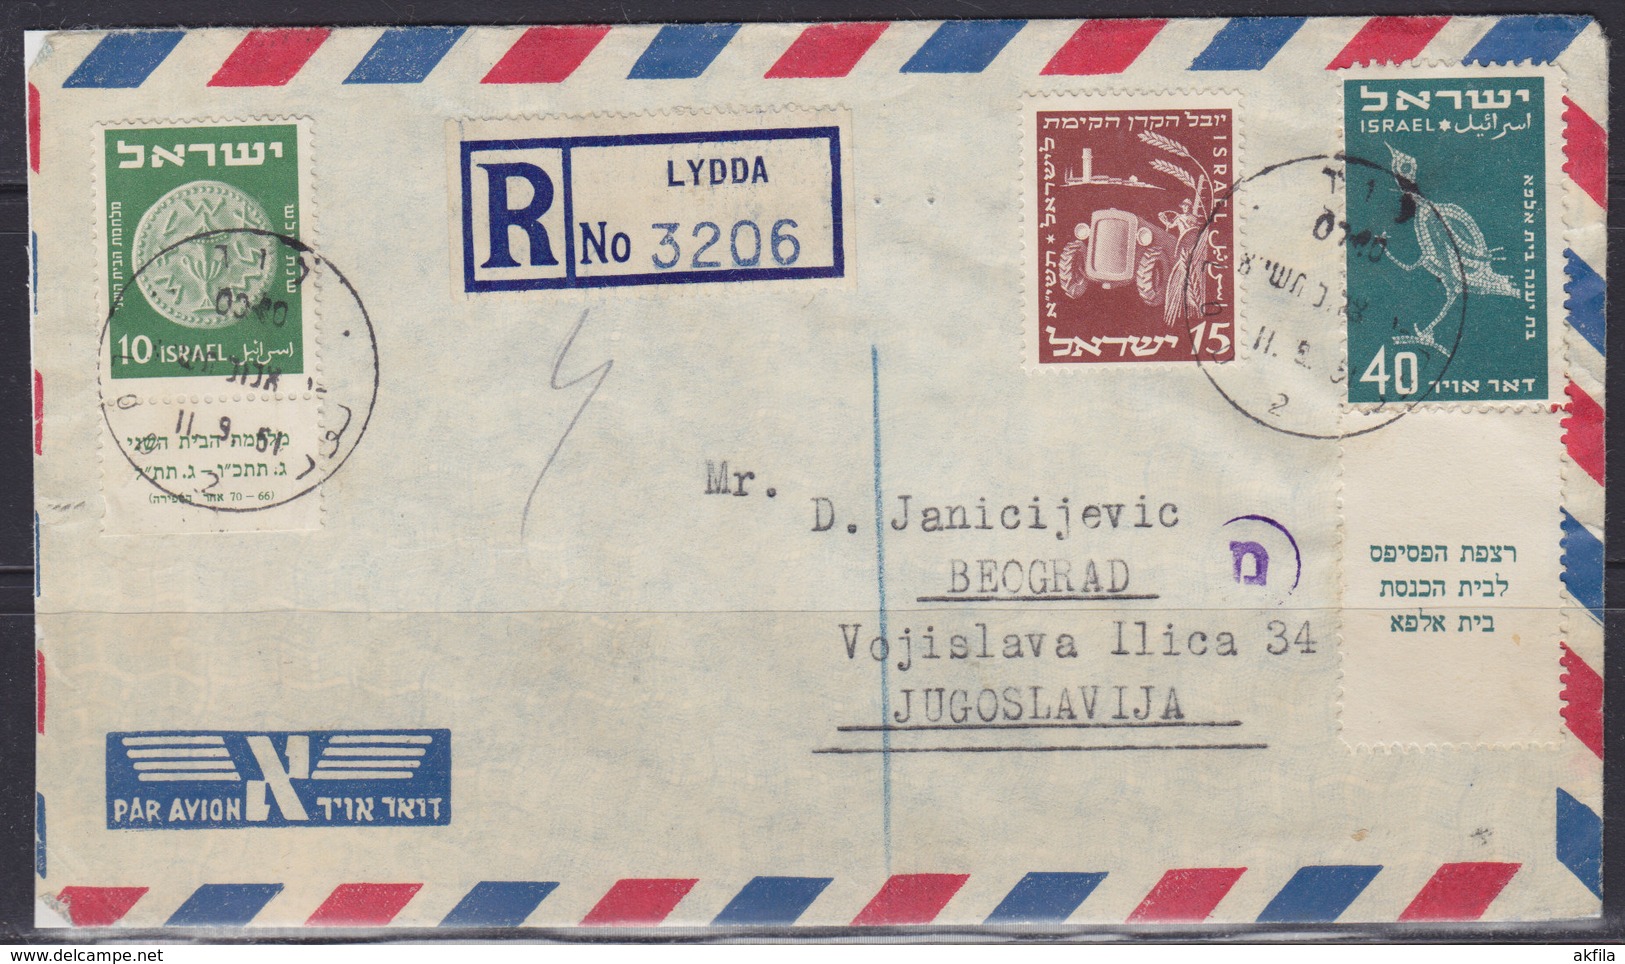 Israel 11.IX.1951 Airmail Letter From Tel Aviv To Beograd (YU) - Poste Aérienne